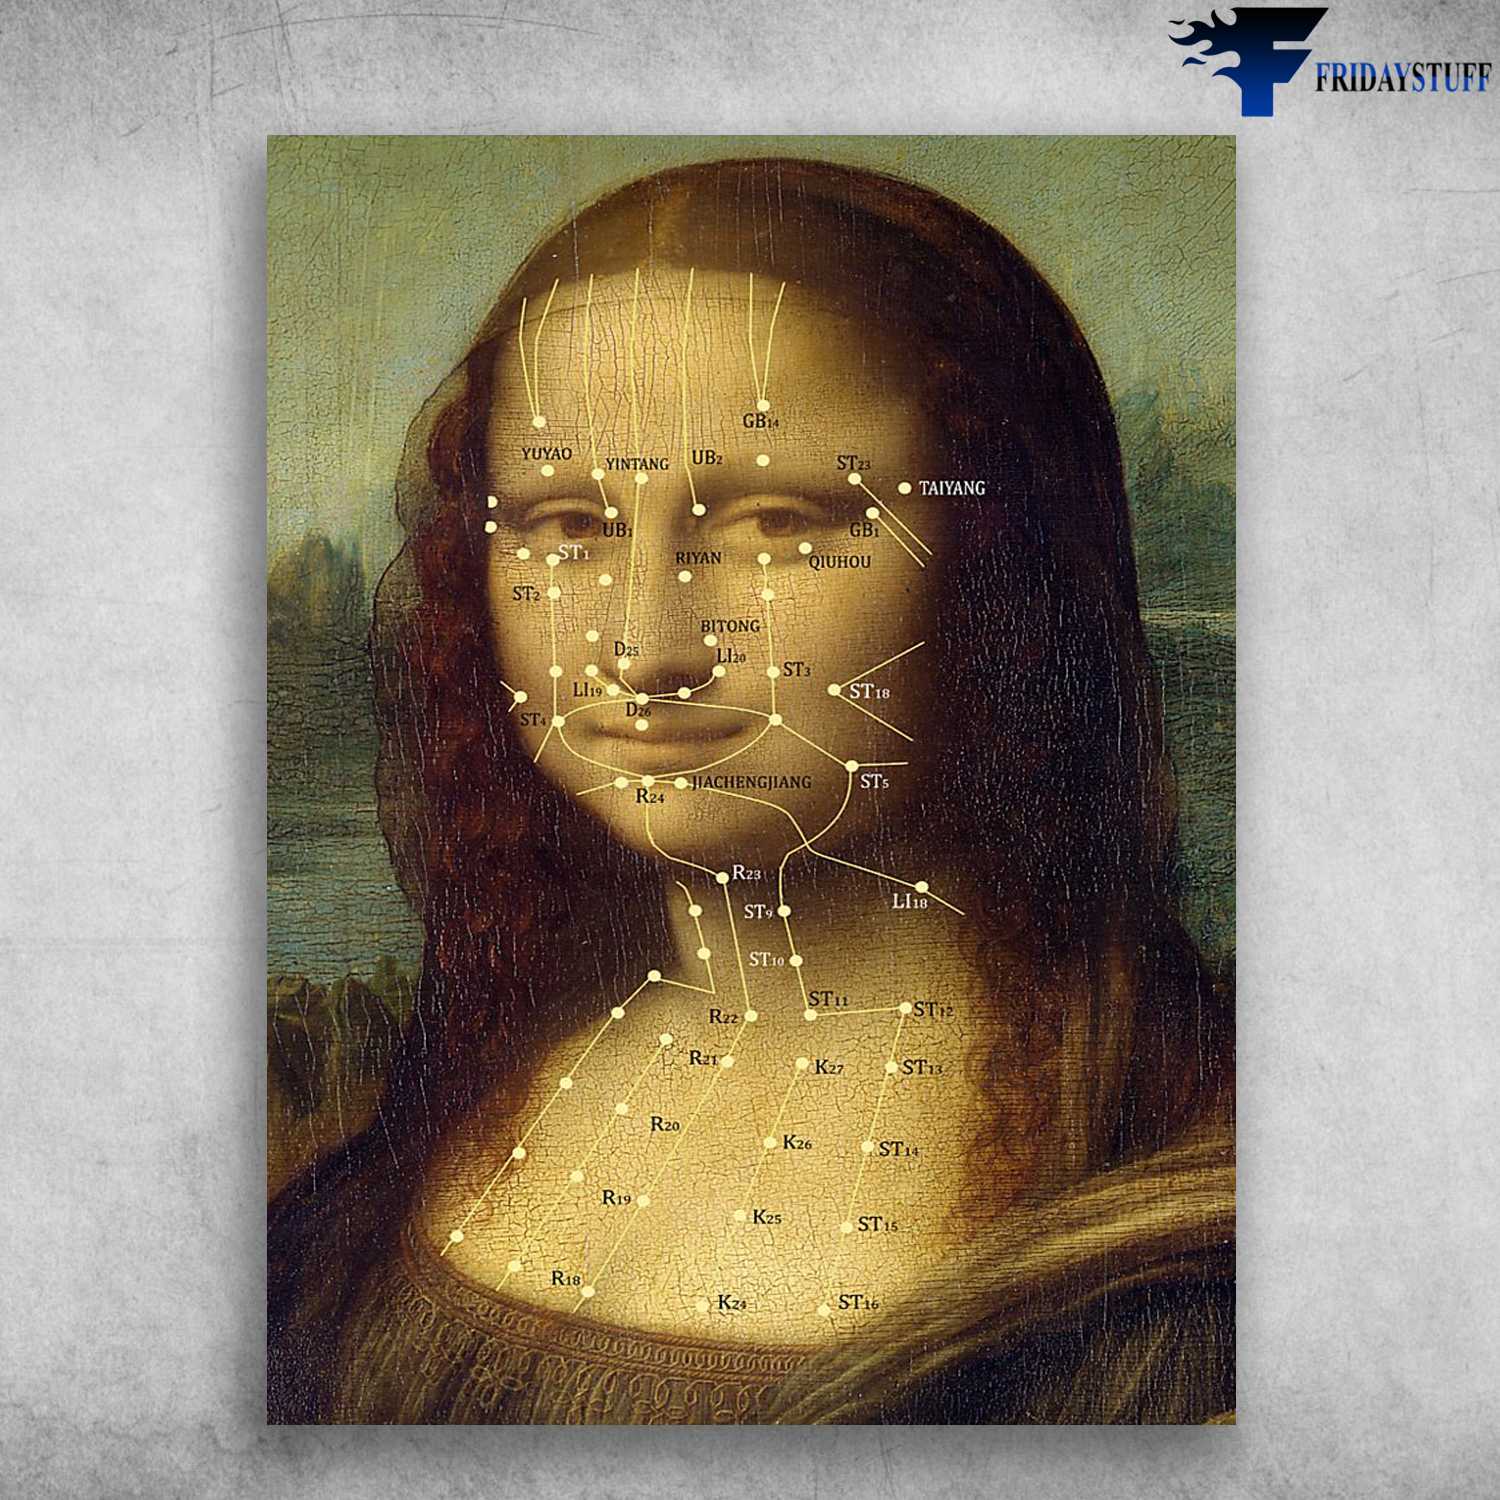 Mona Lisa, Acupuncture Poster, Acupuncture Room